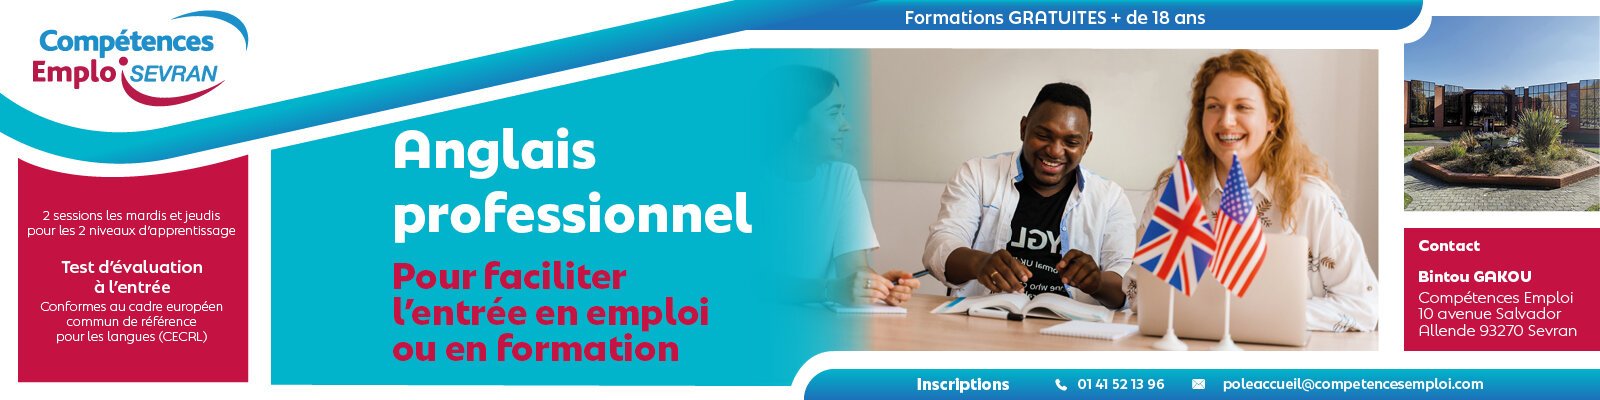 Formation Anglais professionnel